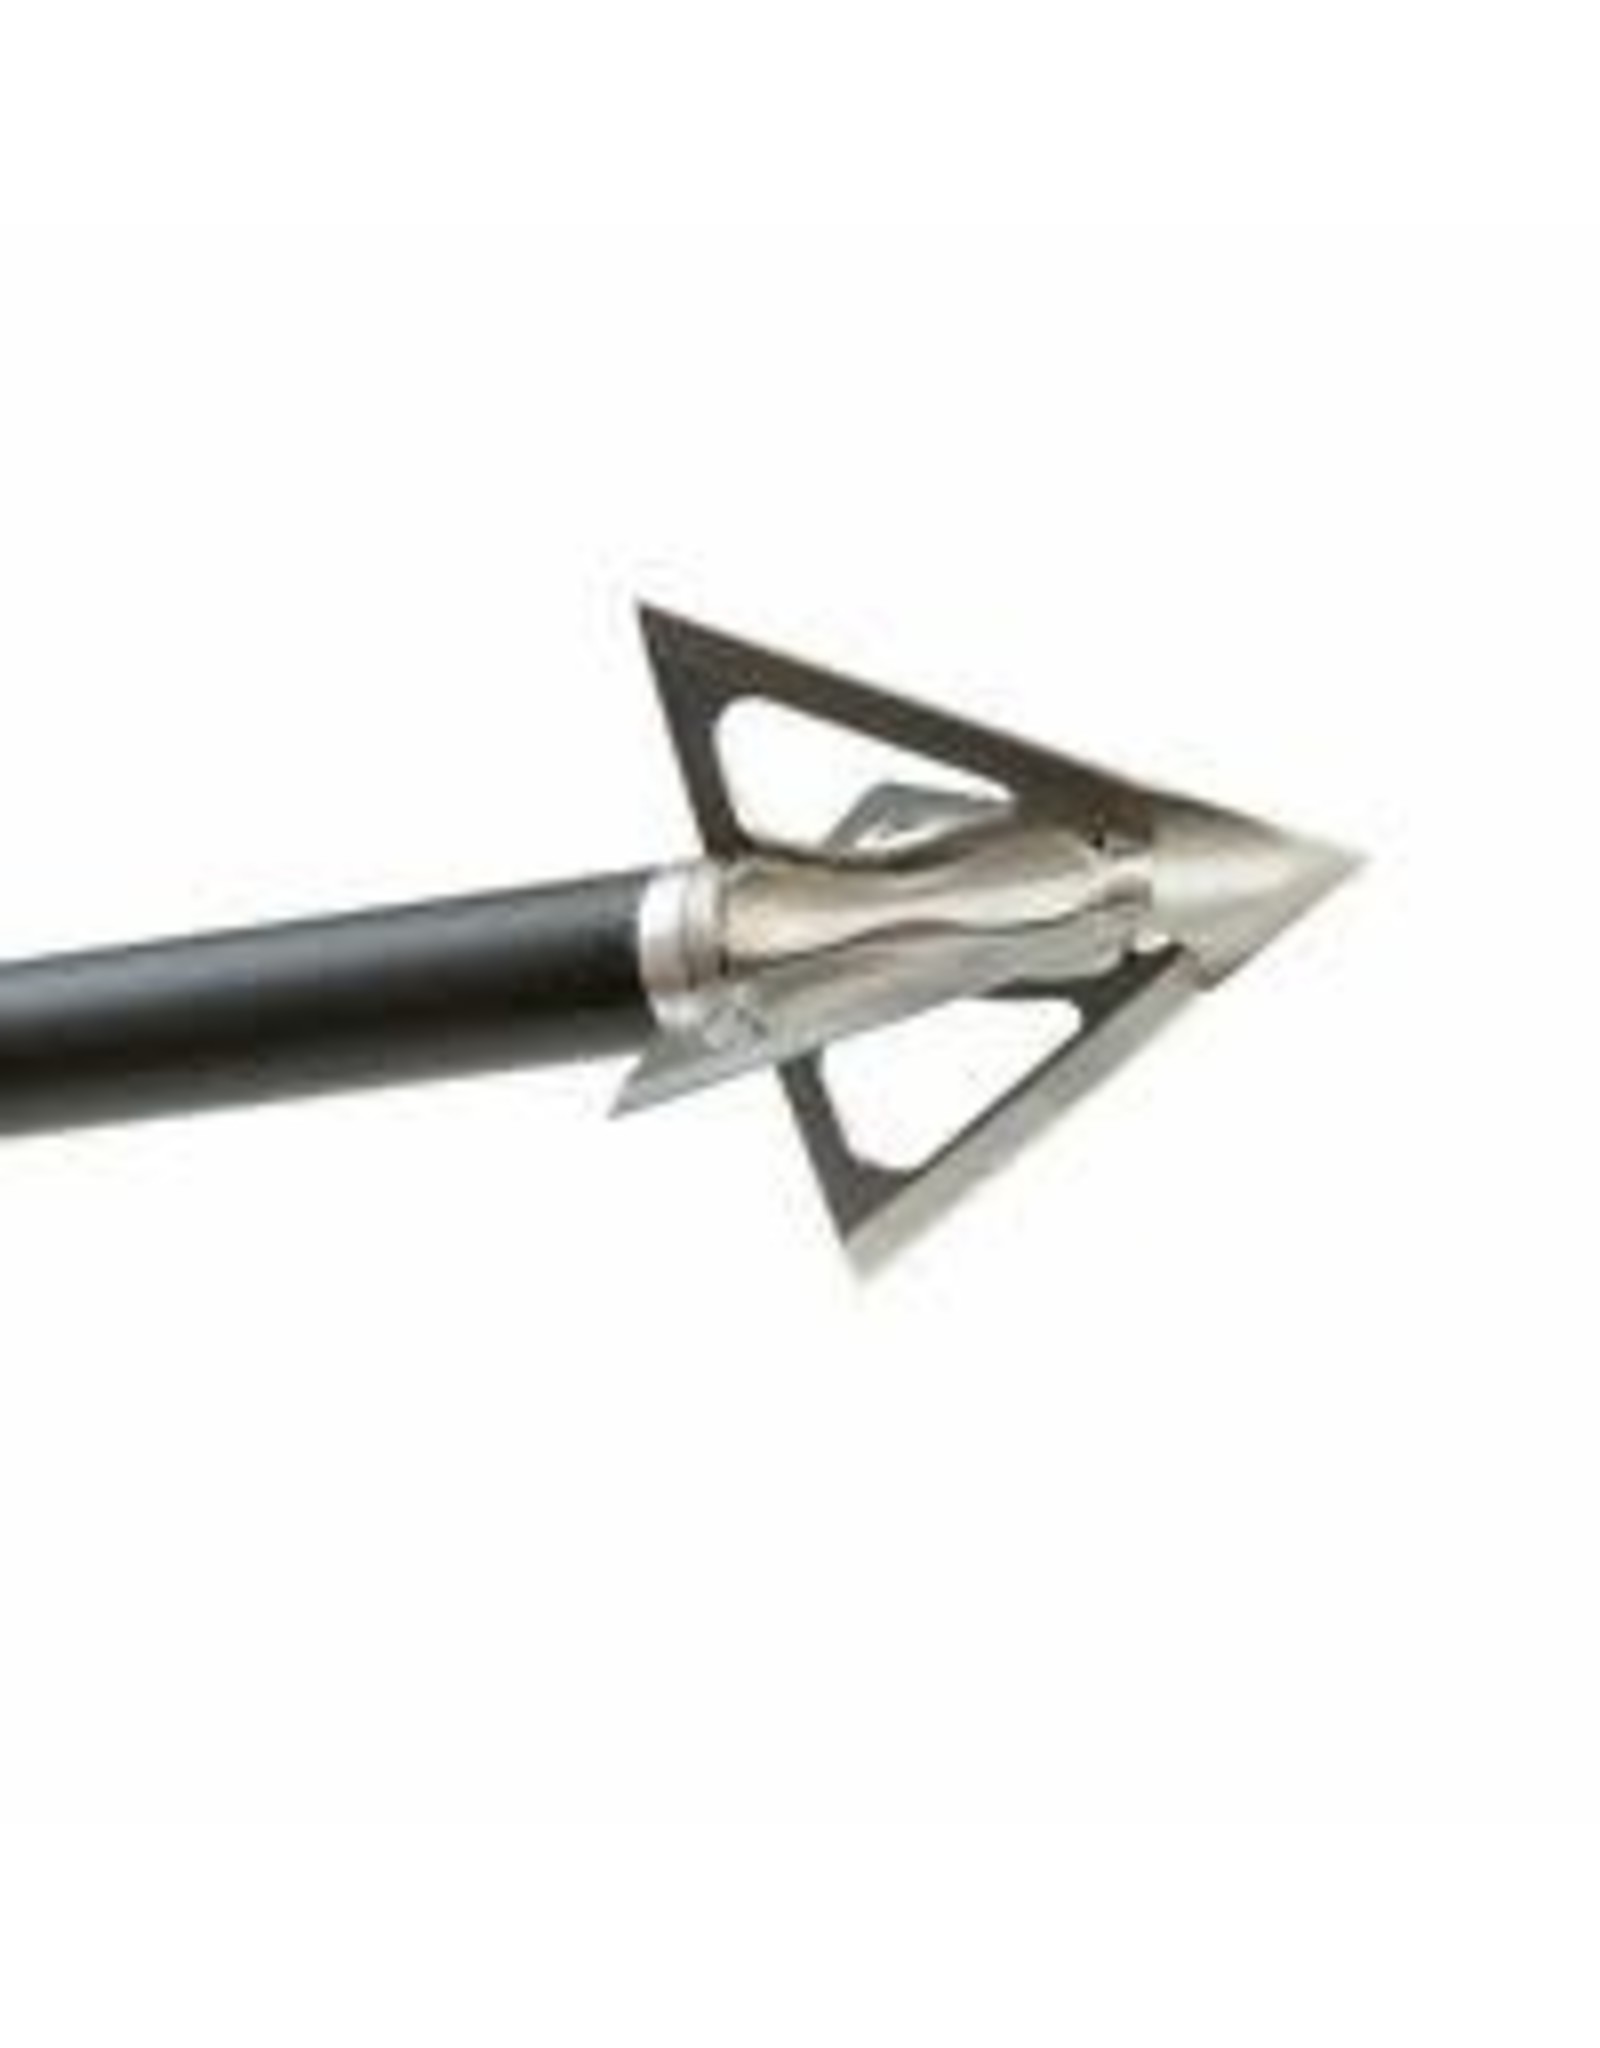 G5 Outdoors G5 Striker V2 125 GR Broadheads w/ Replaceable Blades